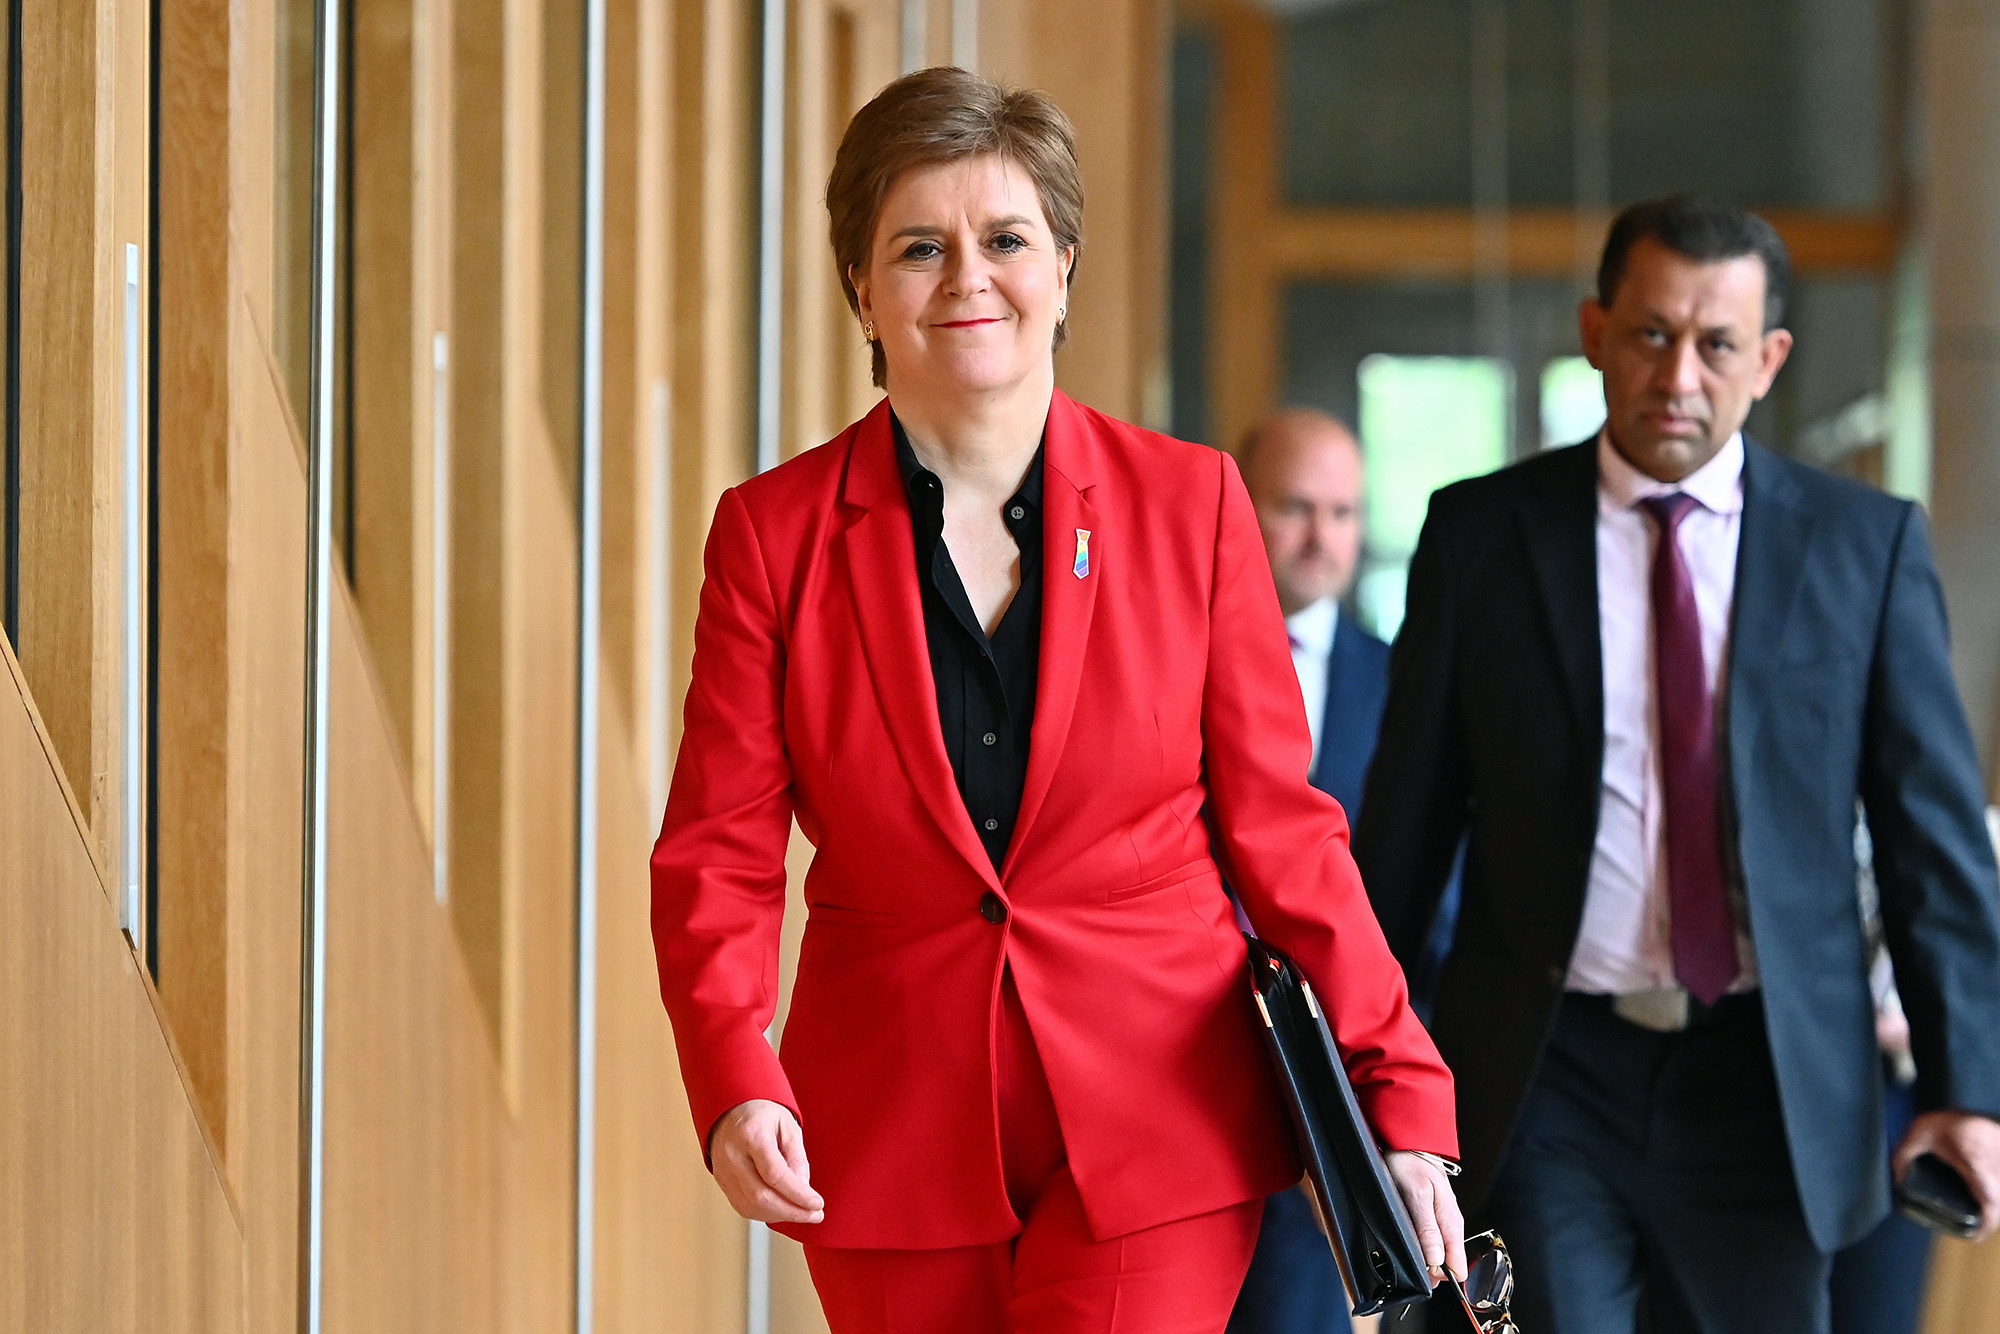 Nicola Sturgeon, center, on the way to First Minister's Questions in the Scottish Parliament, on June 30, in Edinburgh, Scotland.